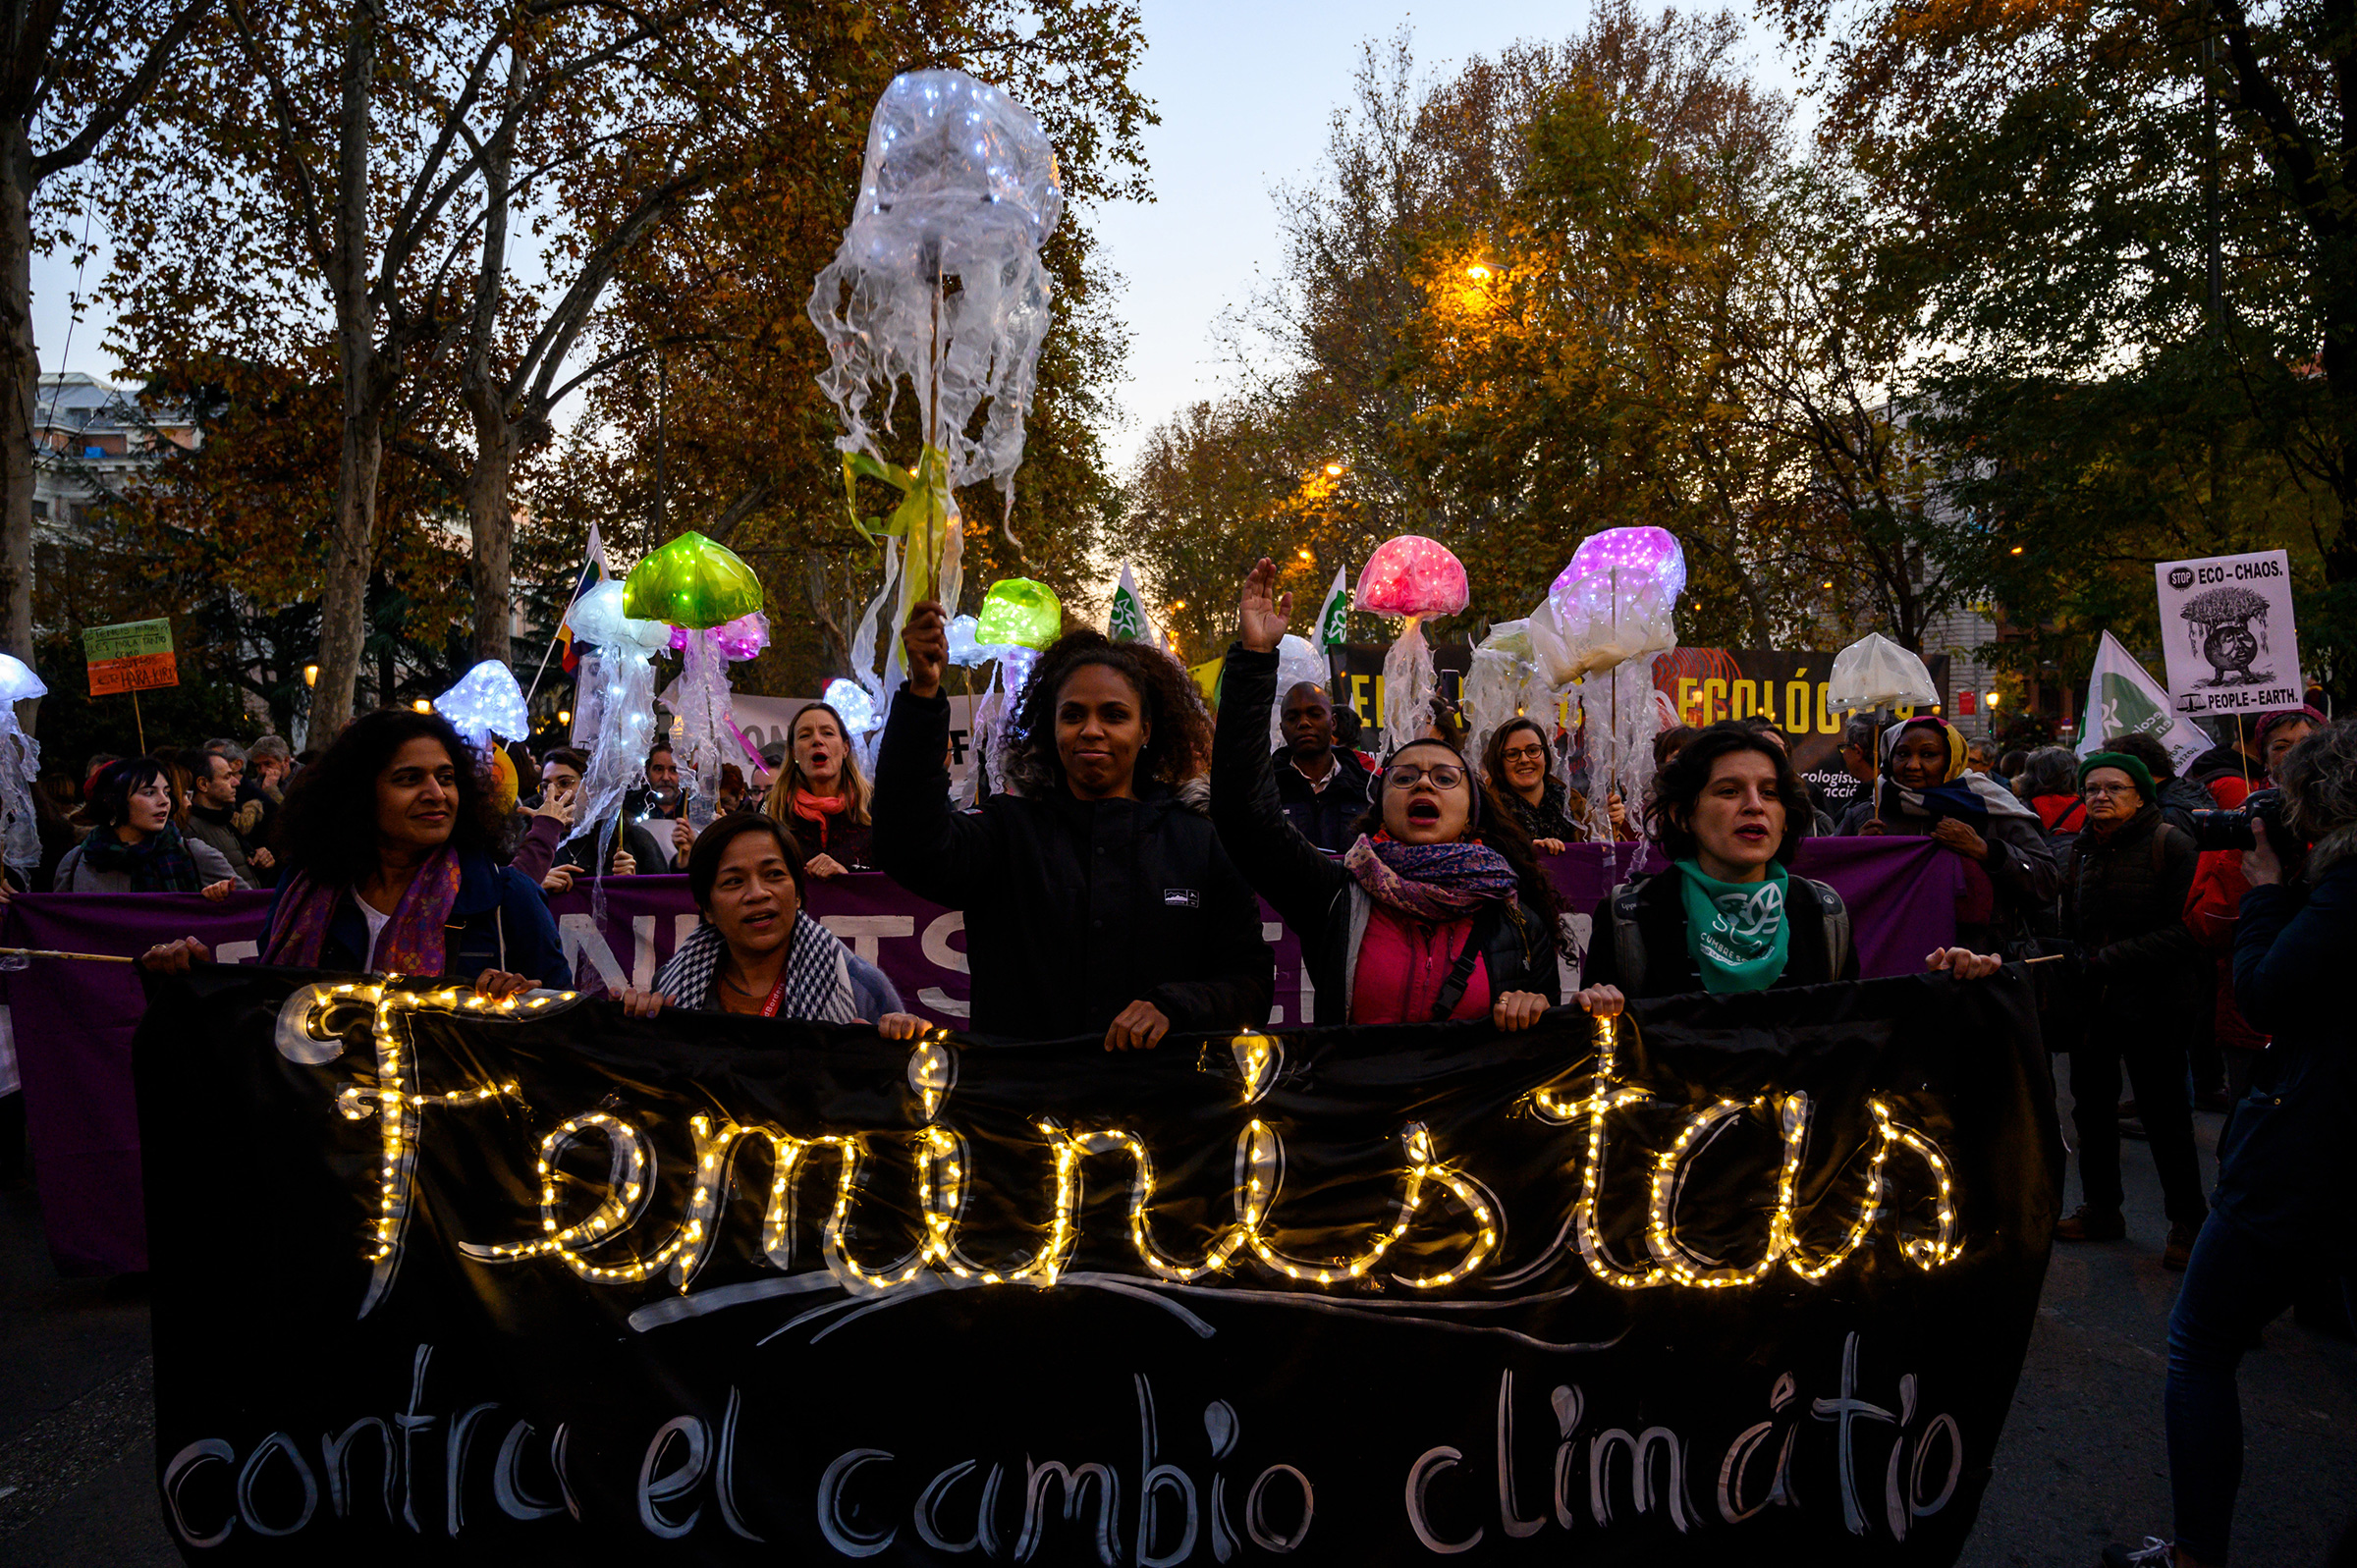 Women hold a banner that reads “Feminists against climate change” at a 2019 protest in Madrid. (Marcos del Mazo—LightRocket/Getty Images)